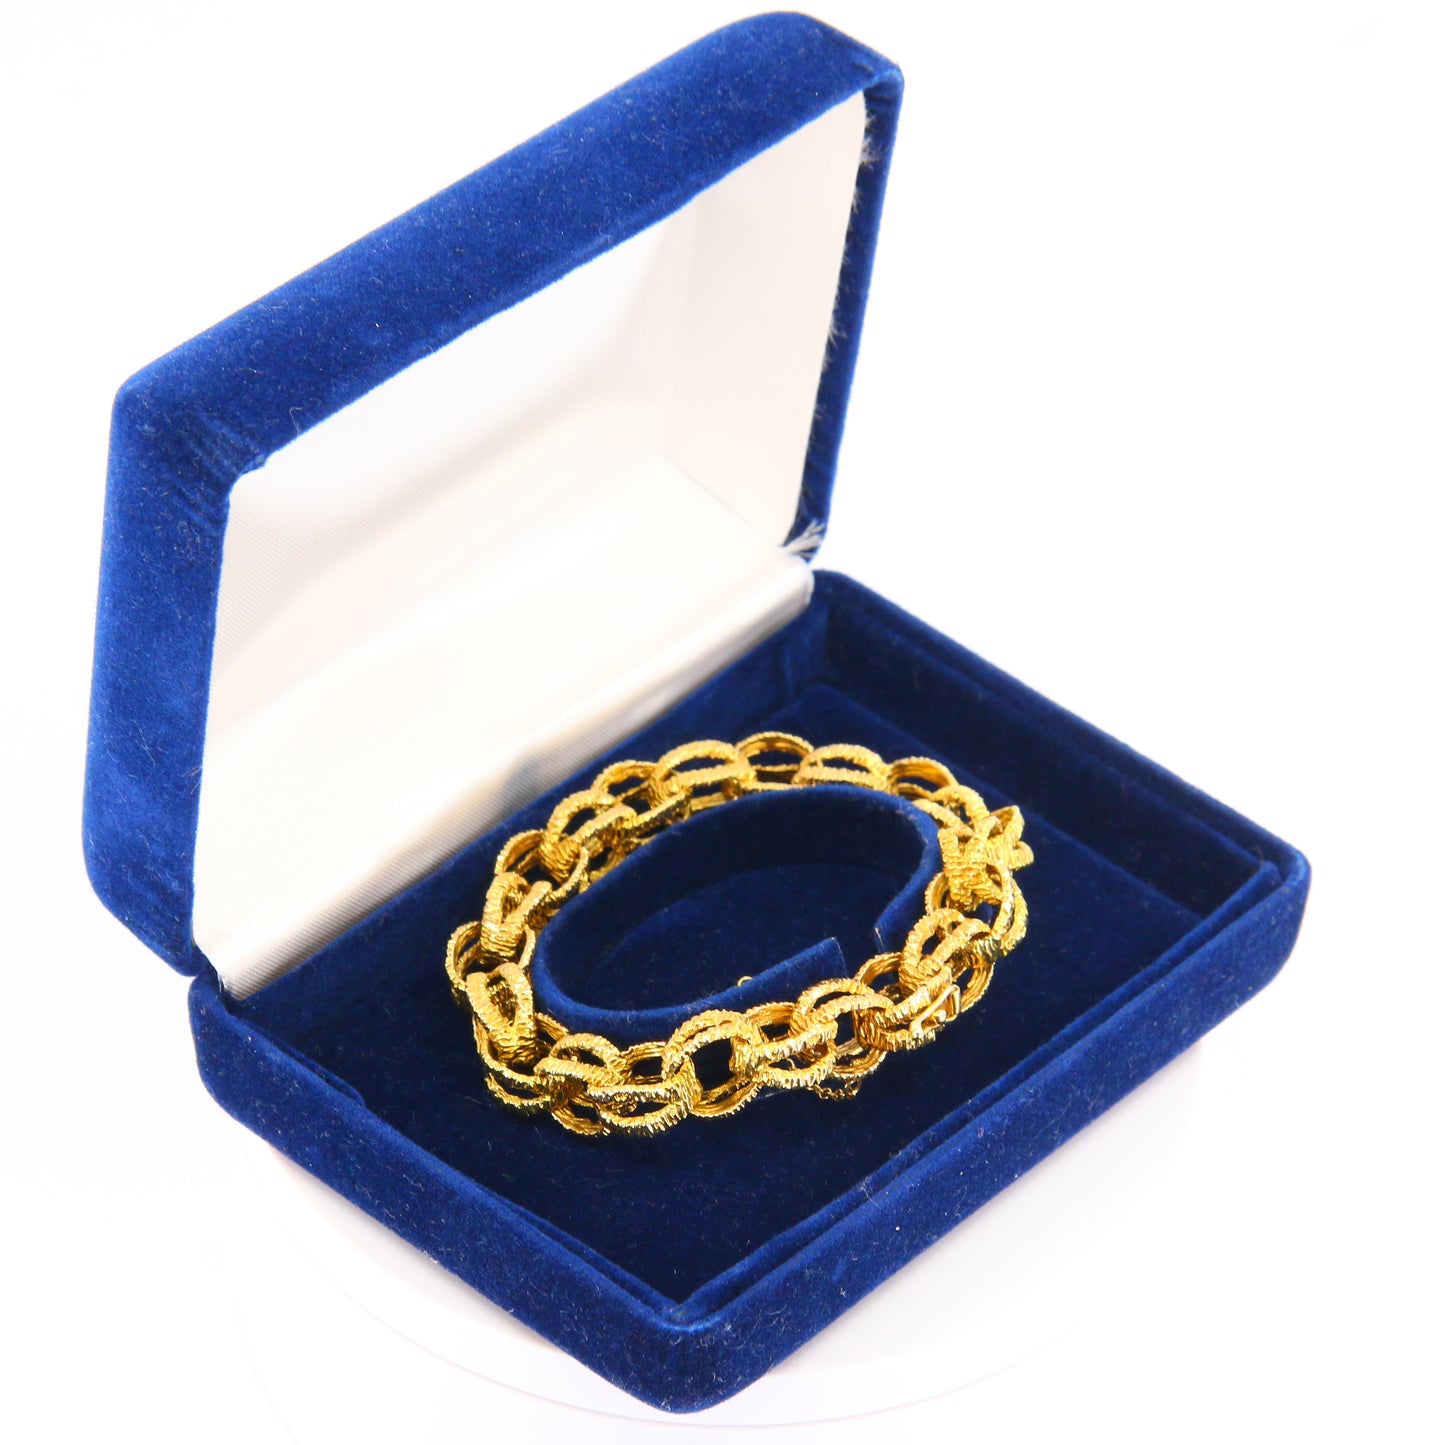 Vintage 1970s London 9ct Chain Link Bracelet Textured Yellow Gold Hallmarked Boxed